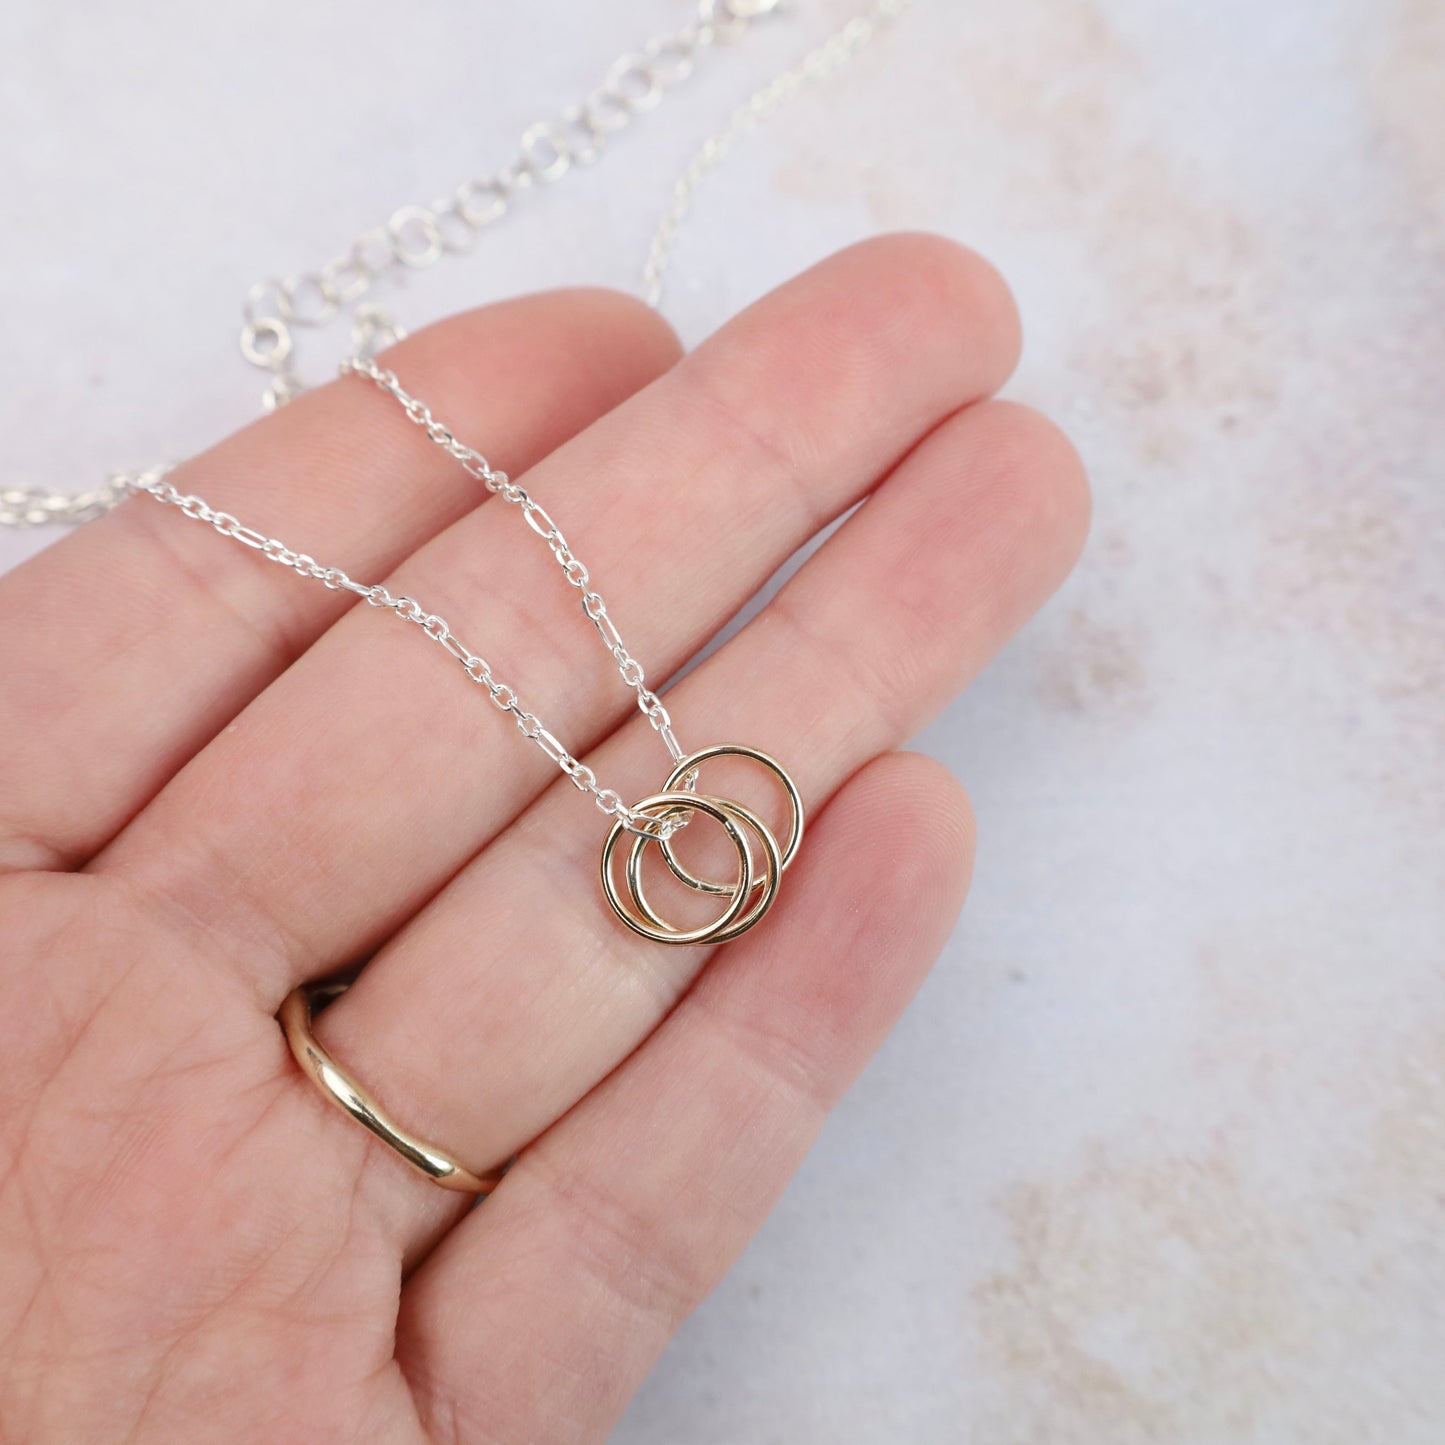 NKL-GF Gratitude Necklace with Gold Filled Rings